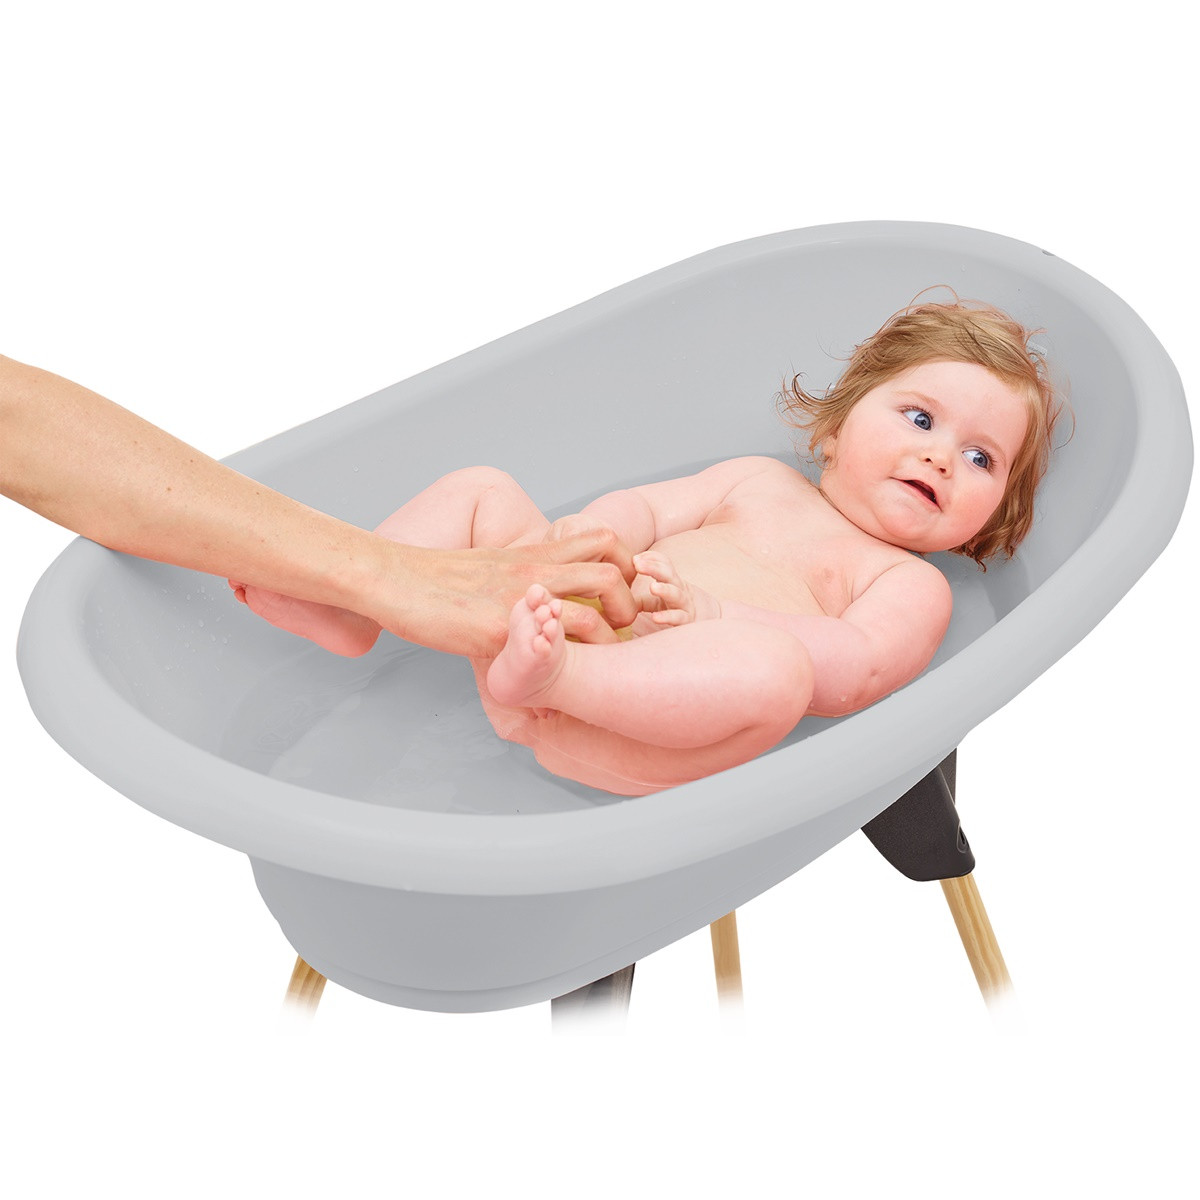  THERMOBABY - VASCO 5 in 1 Baby Bath Set - Wooden Foot, Drain  Hose, Bath Lounger Thermometer - Charme Grey - Foldable & Stable - Made in  France : Baby